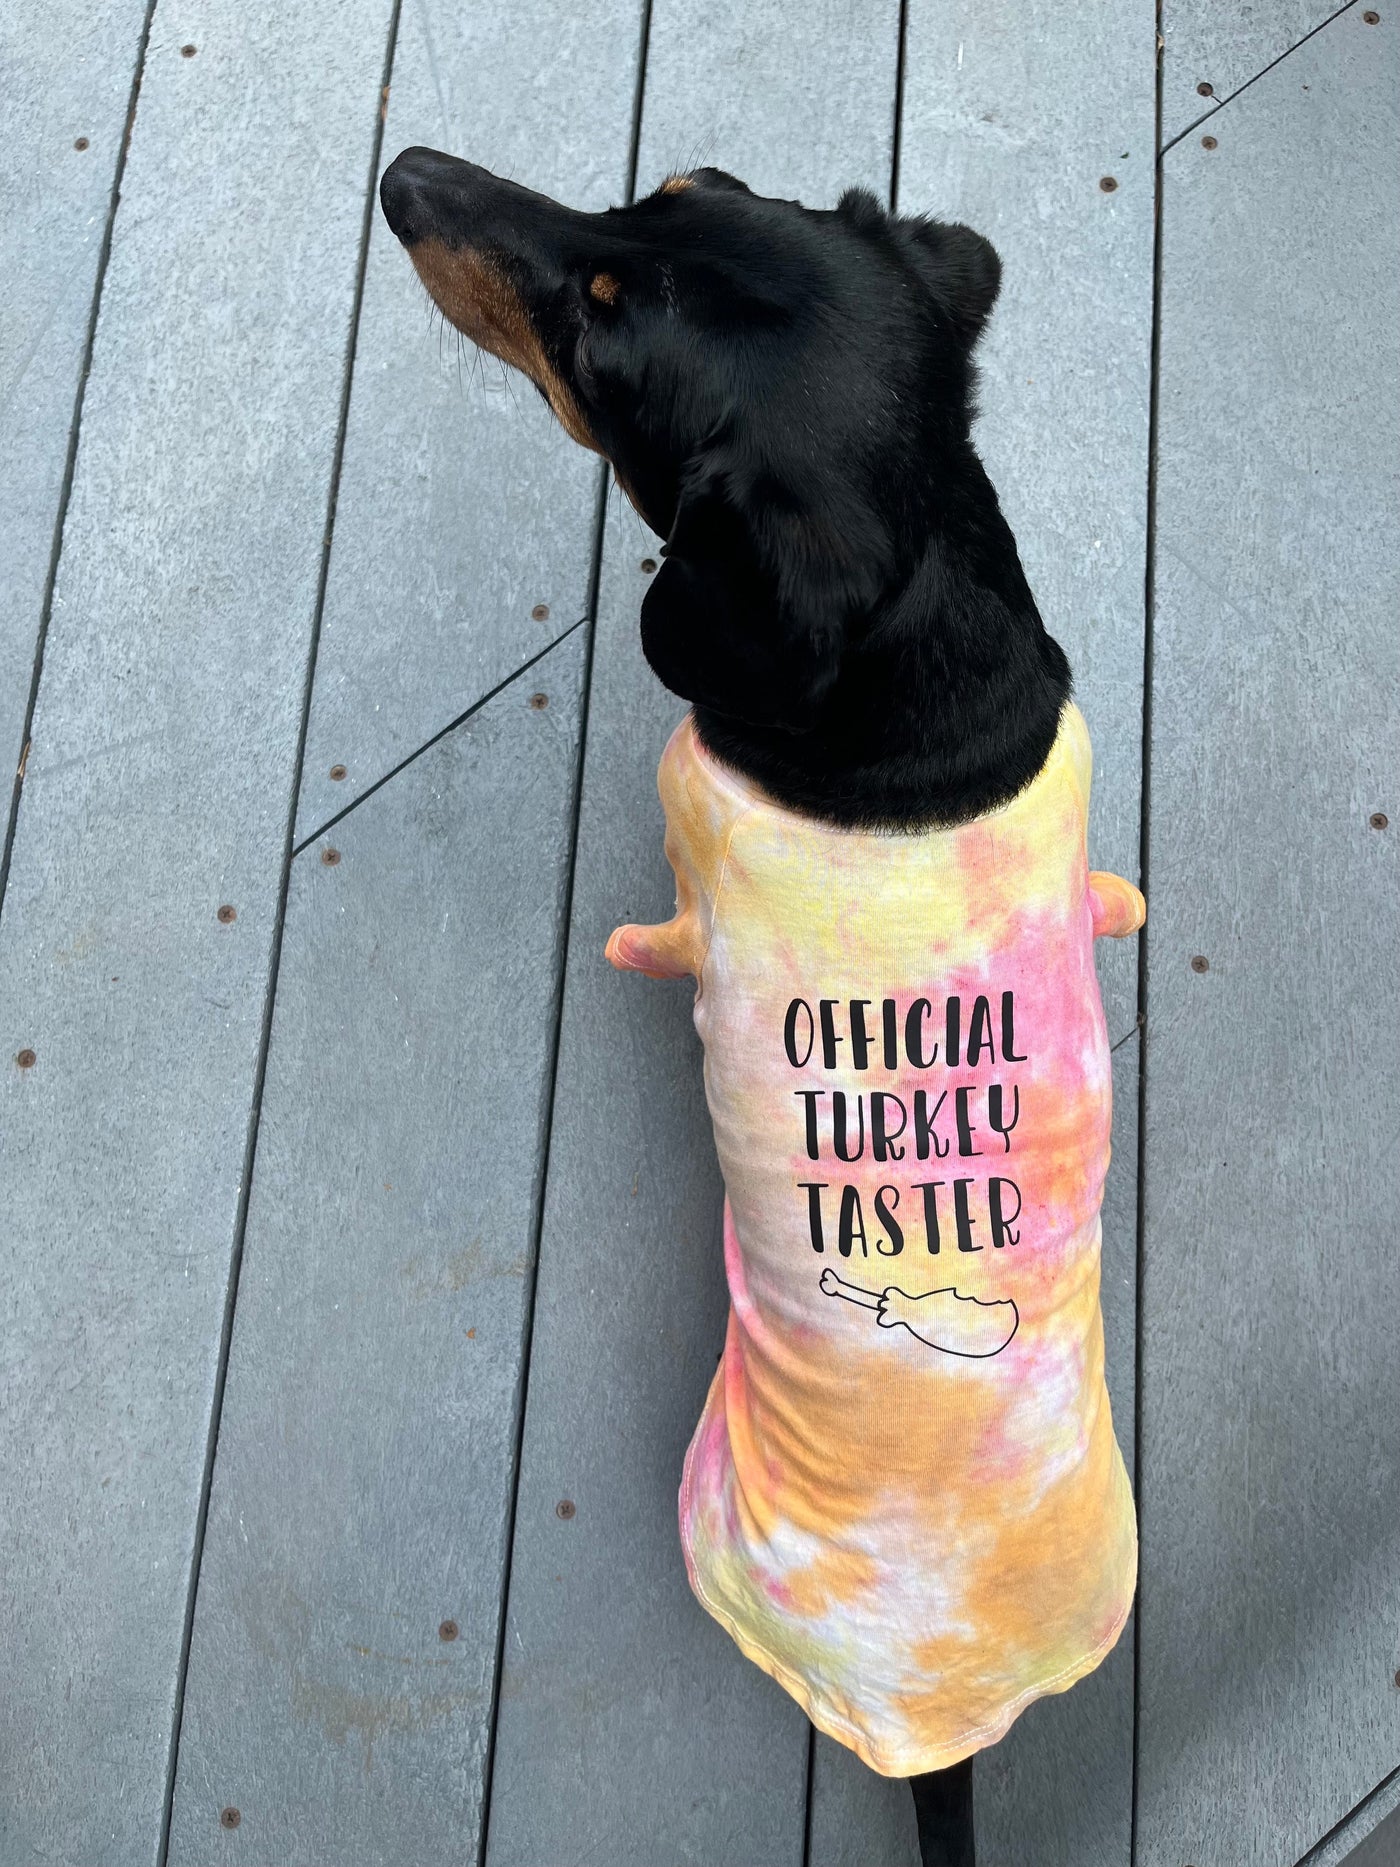 Holiday Tie-Dye Shirt for Pets - Official Turkey Taster